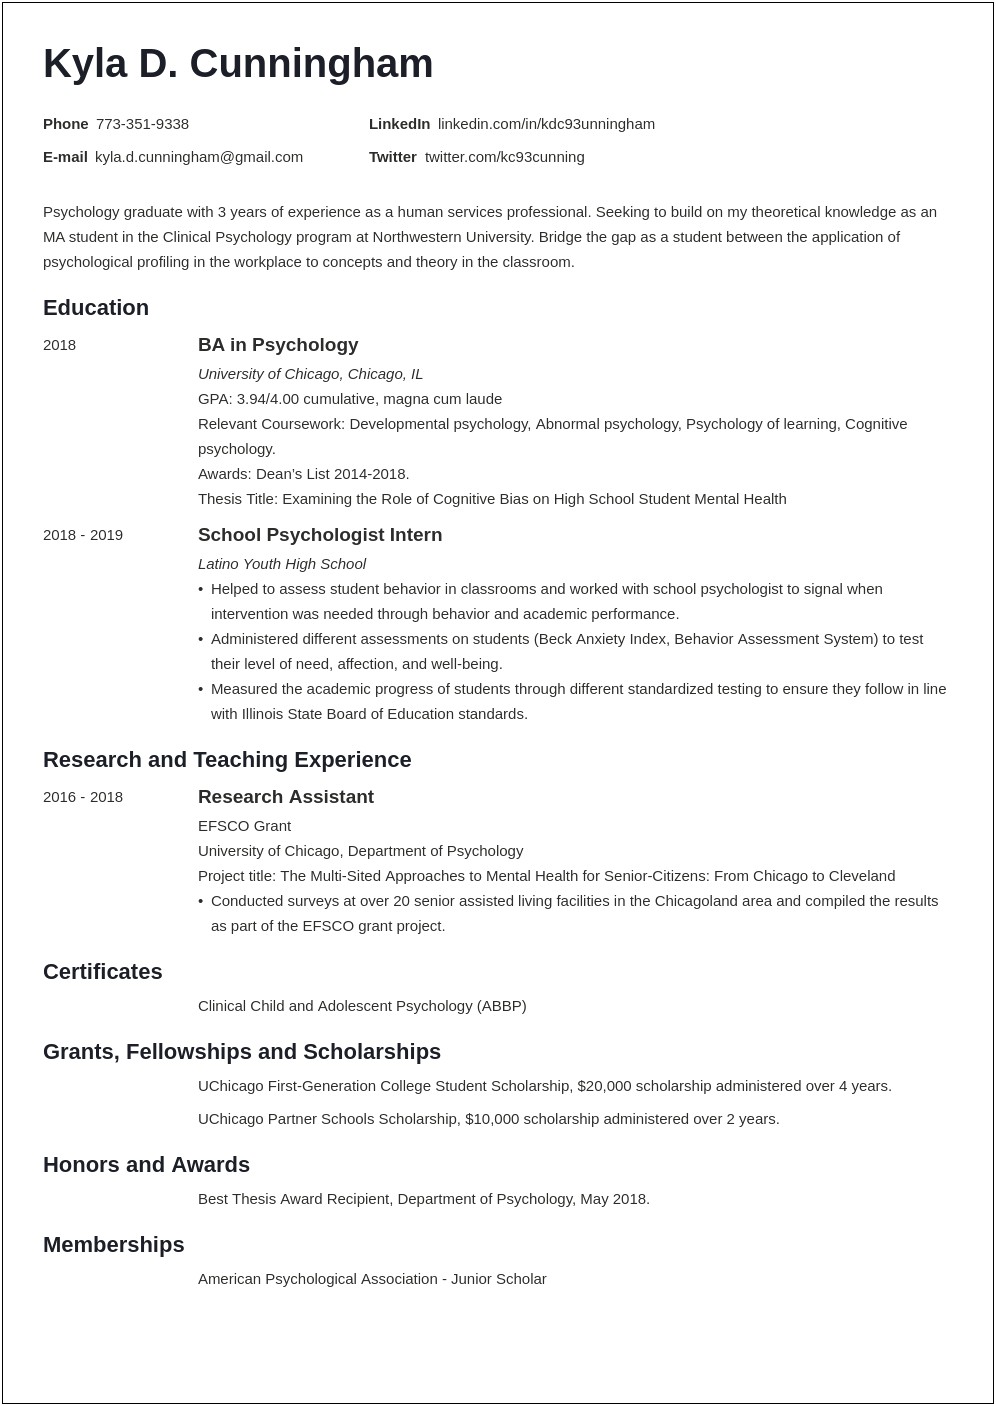 Resume Objective To Get Into Grad School